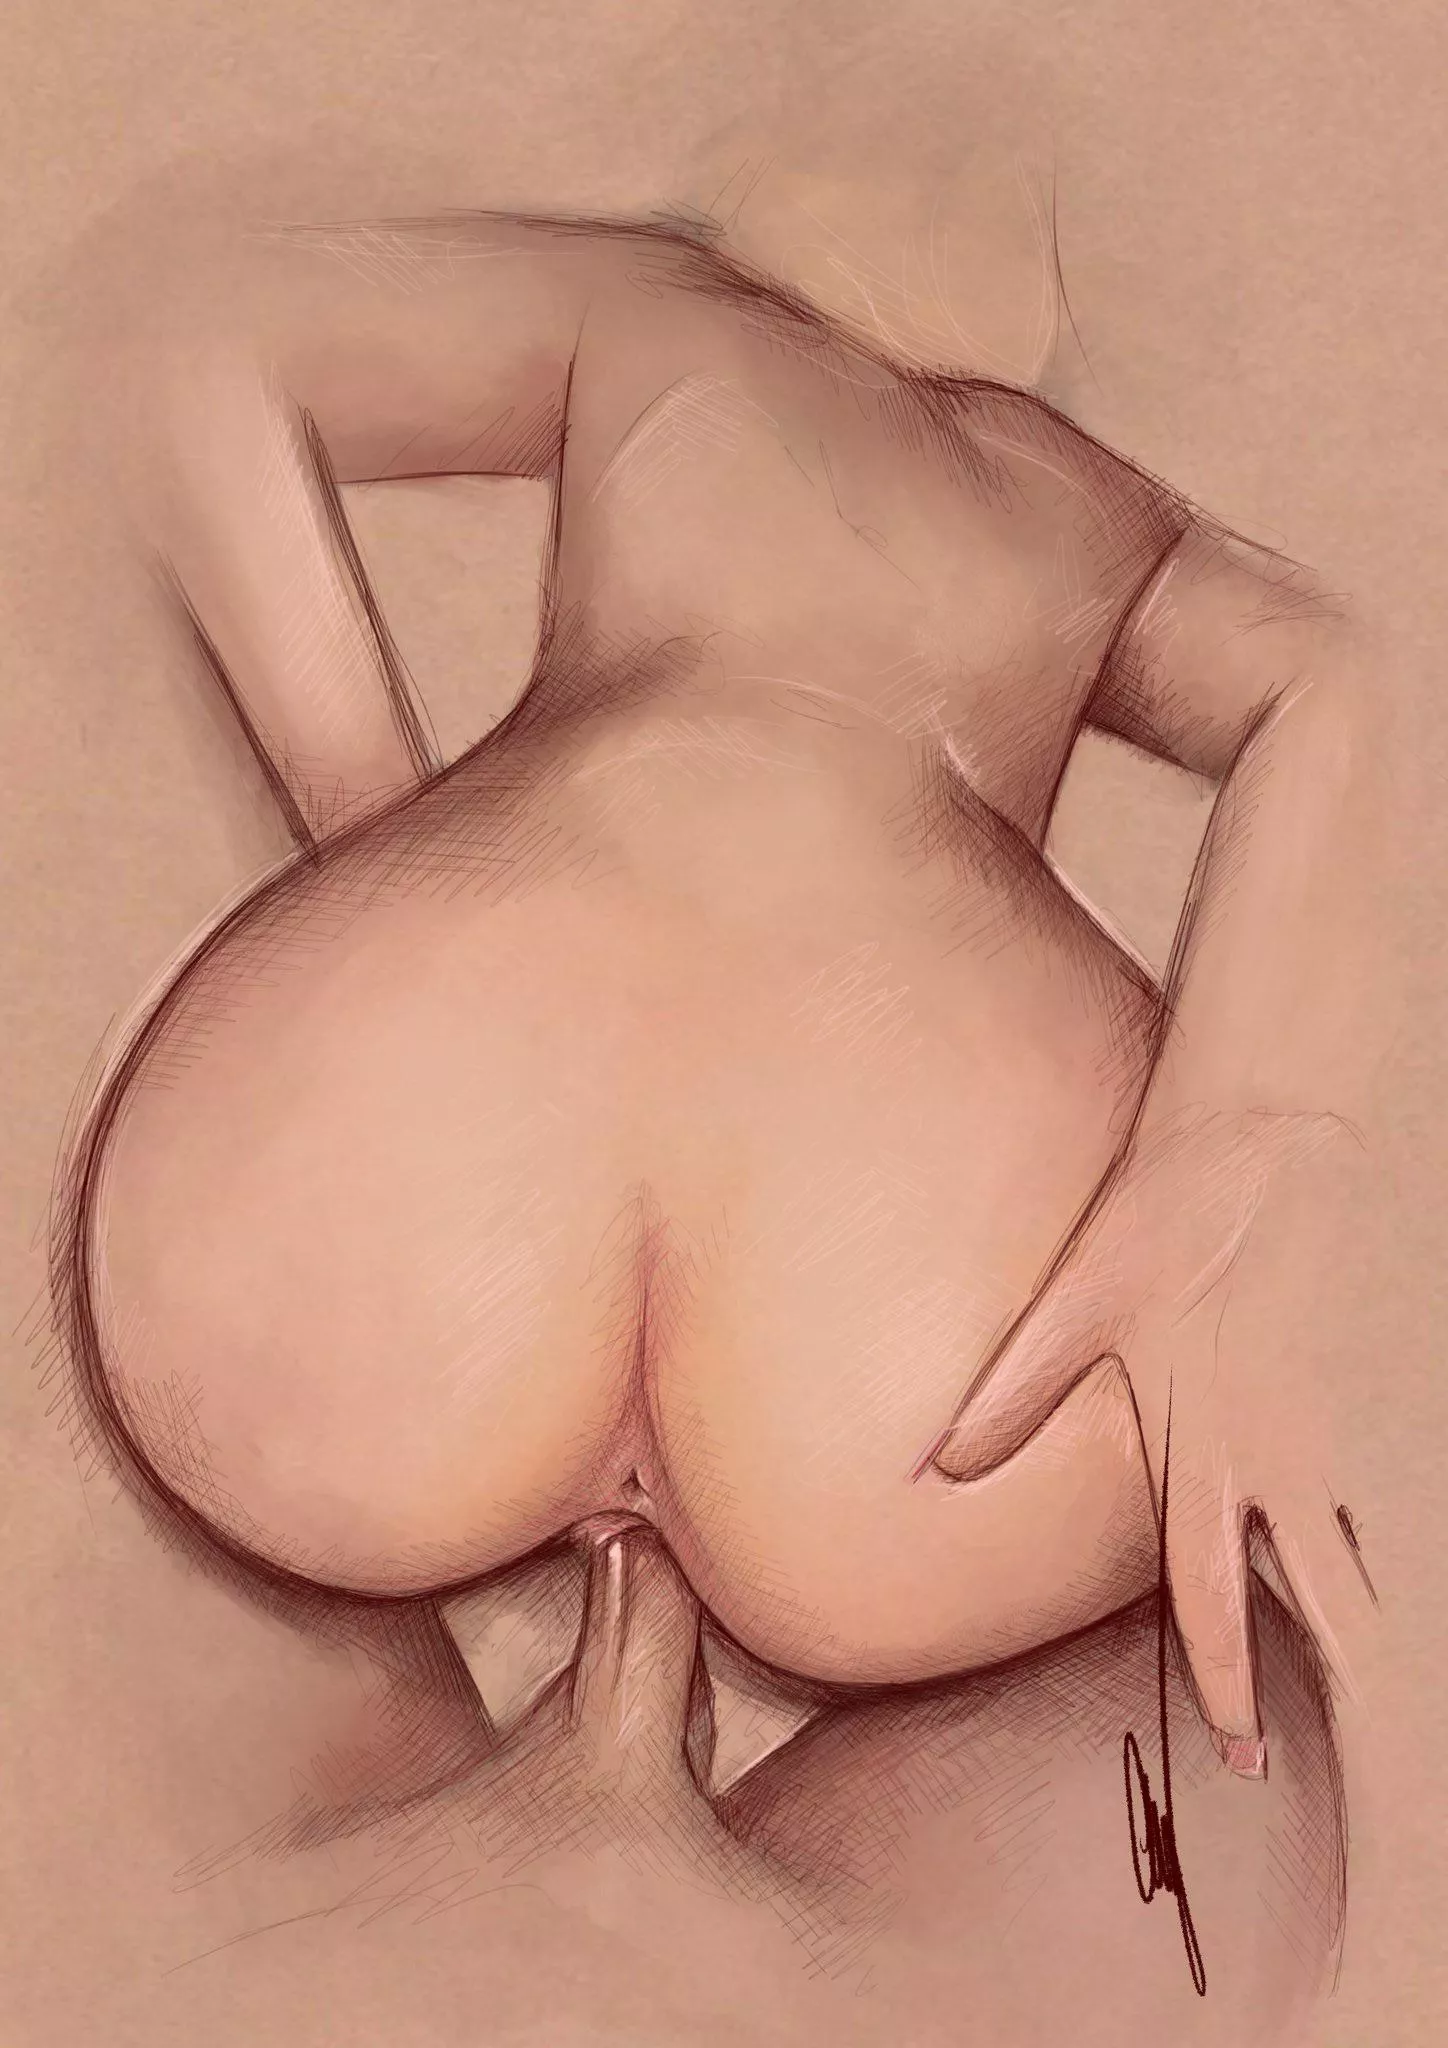 1010 - Having your porn turned into art is amazing!! 10/10 recommend ! nudes by  TheASSassinNSFW